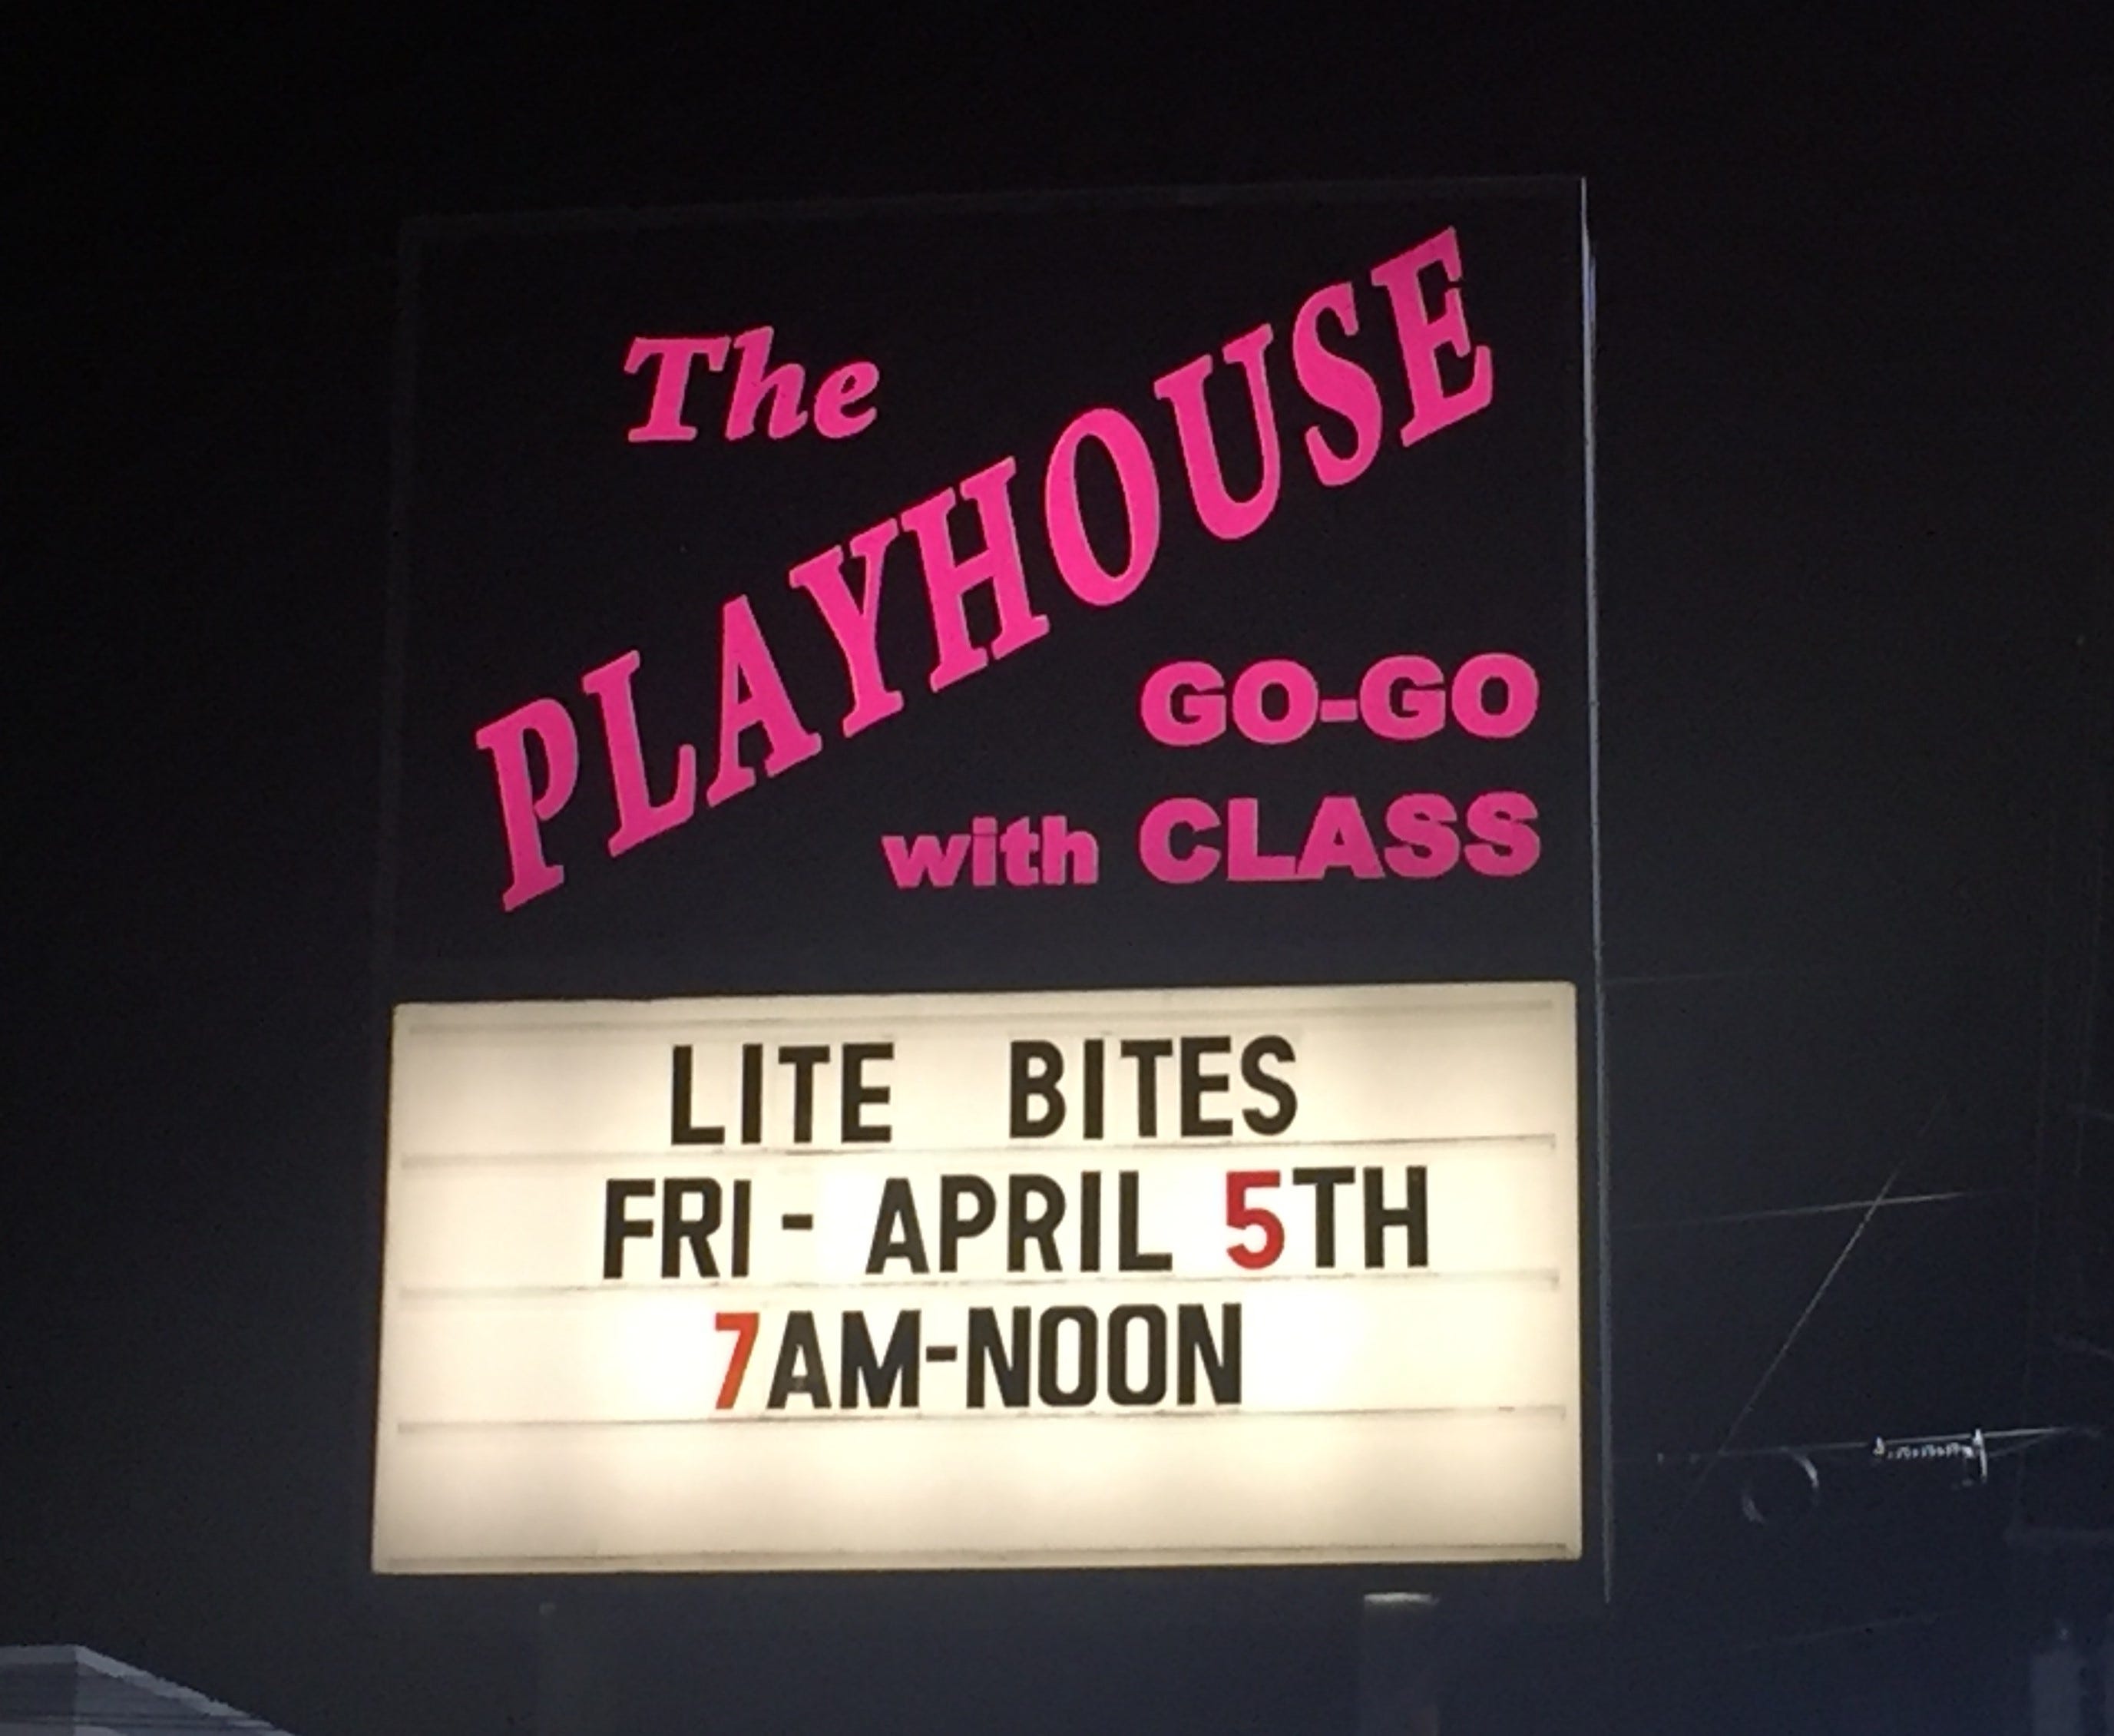 playhouse lounge schedule